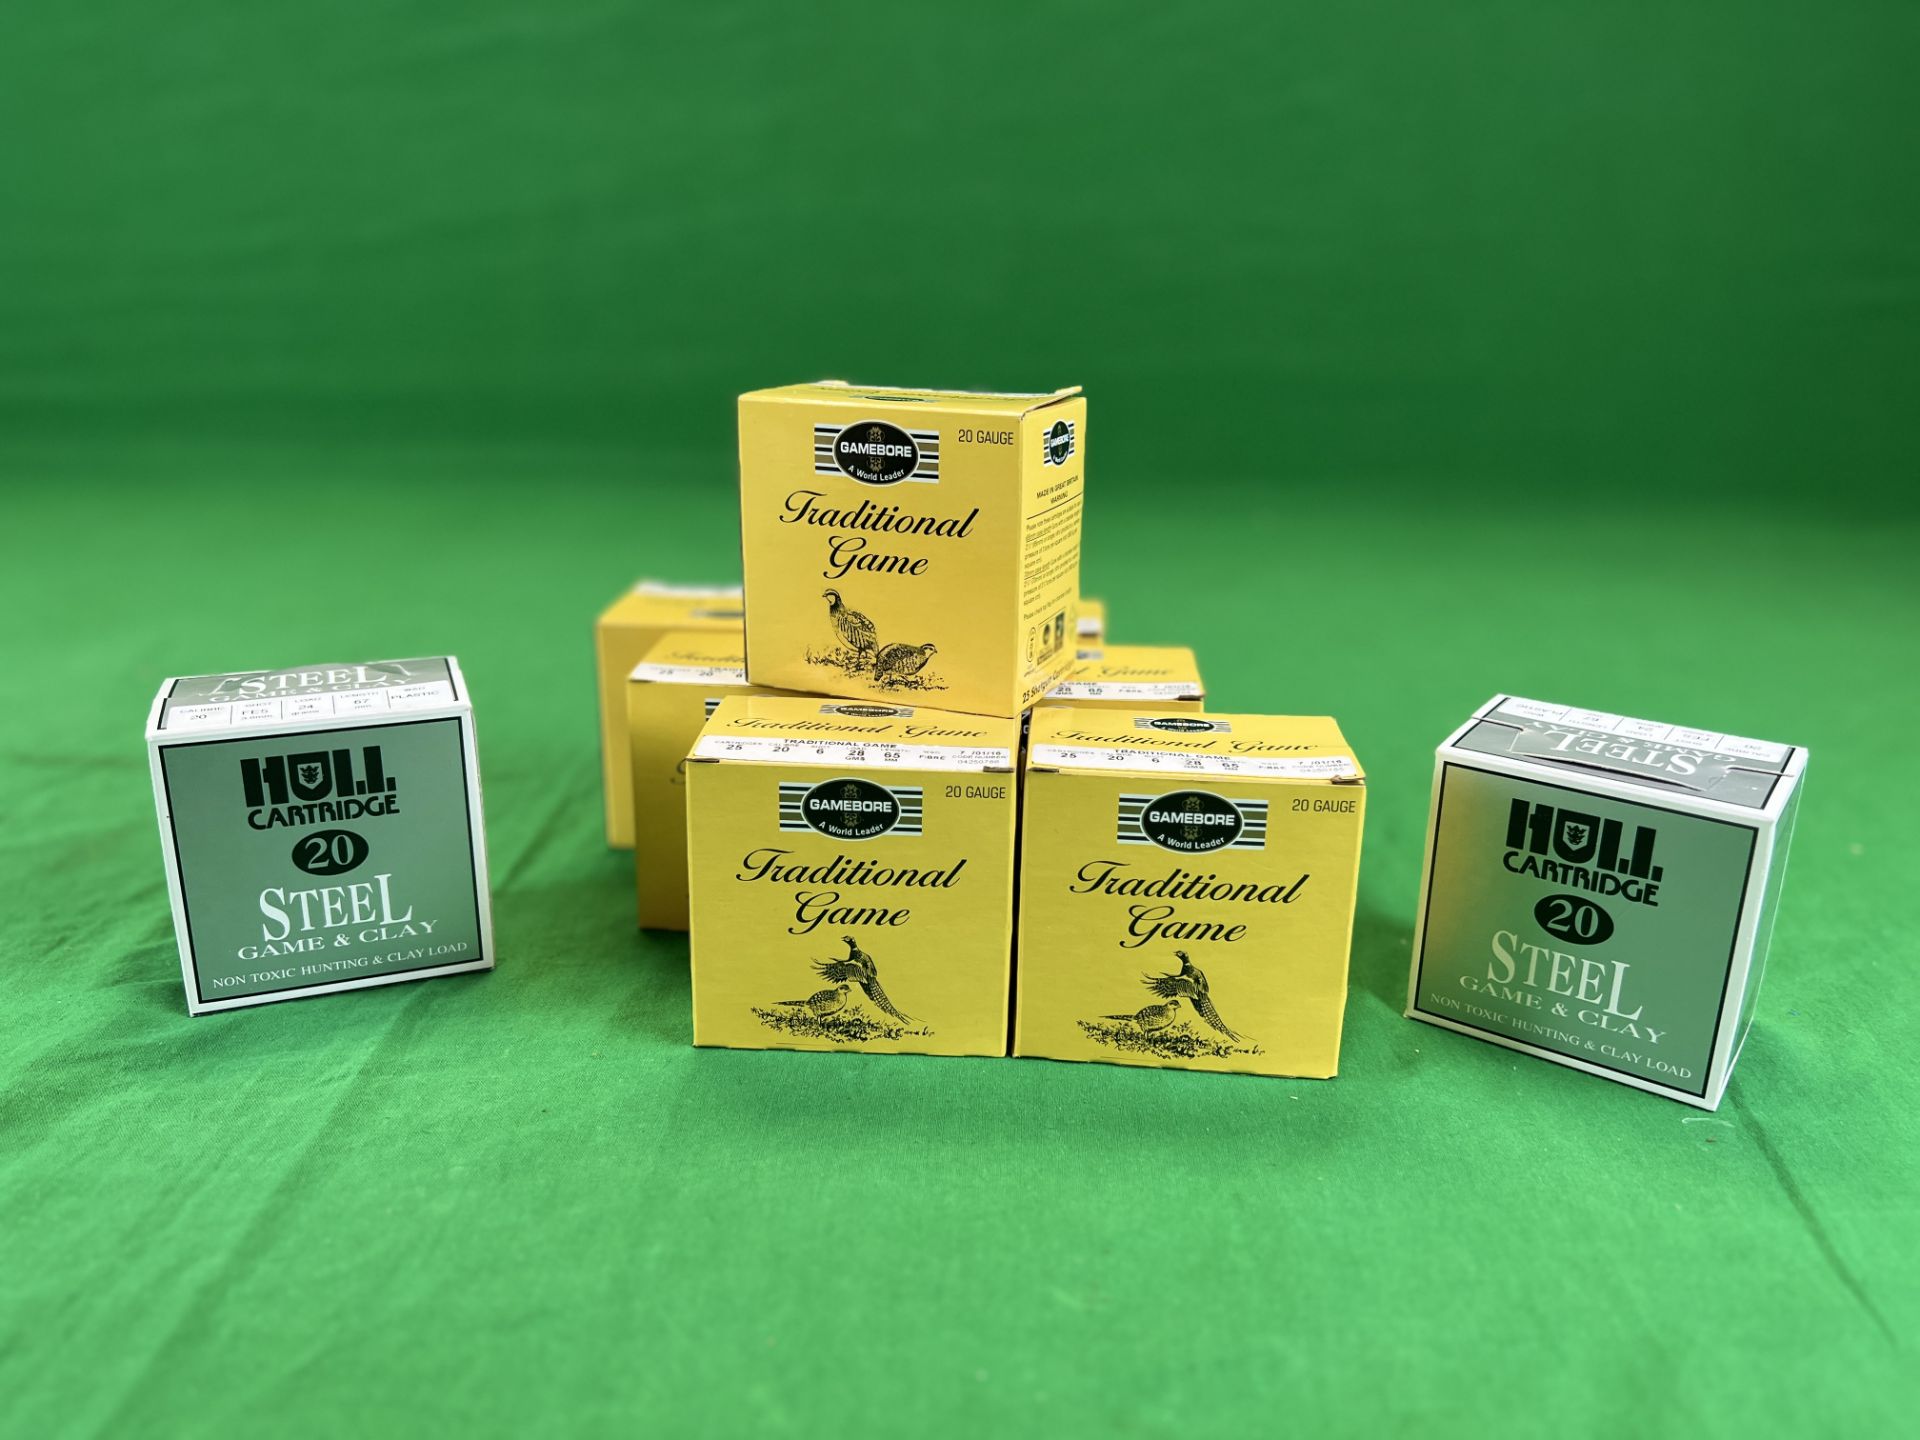 210 20 GAUGE CARTRIDGES TO INCLUDE GAMEBORE TRADITIONAL GAME 6 SHOT 28GM CARTRIDGES AND HULL